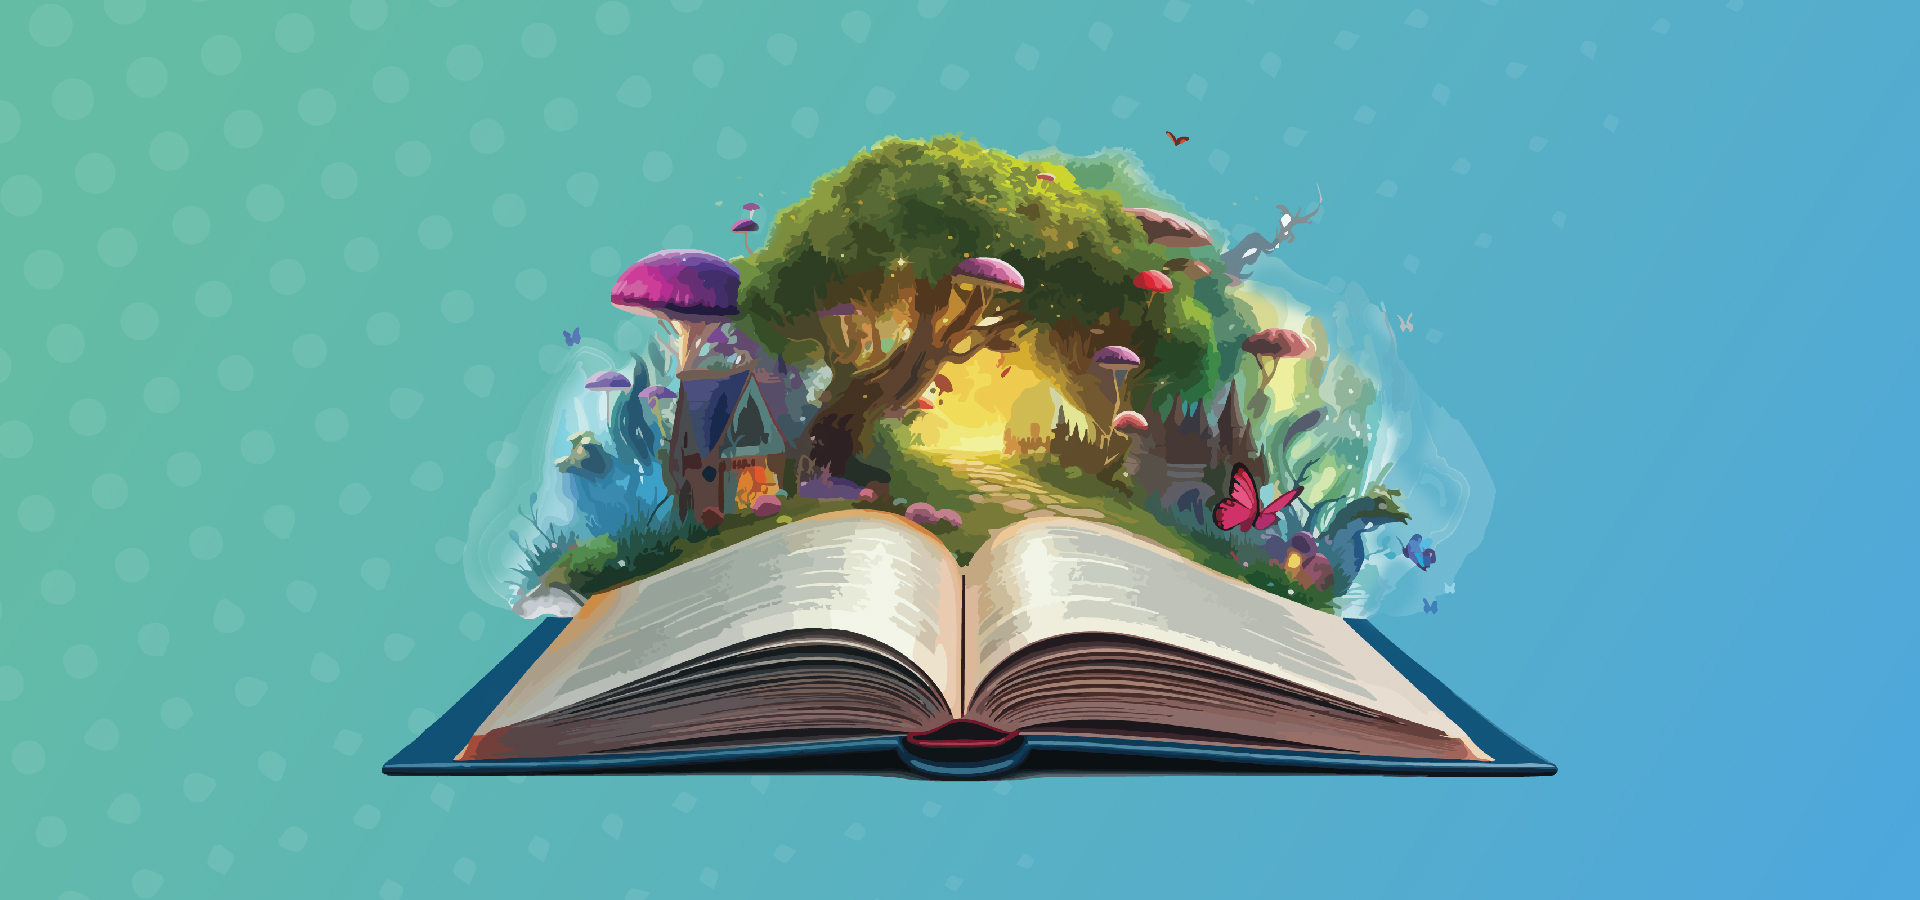 An open book with a fantasy forest graphic emerging from the pages